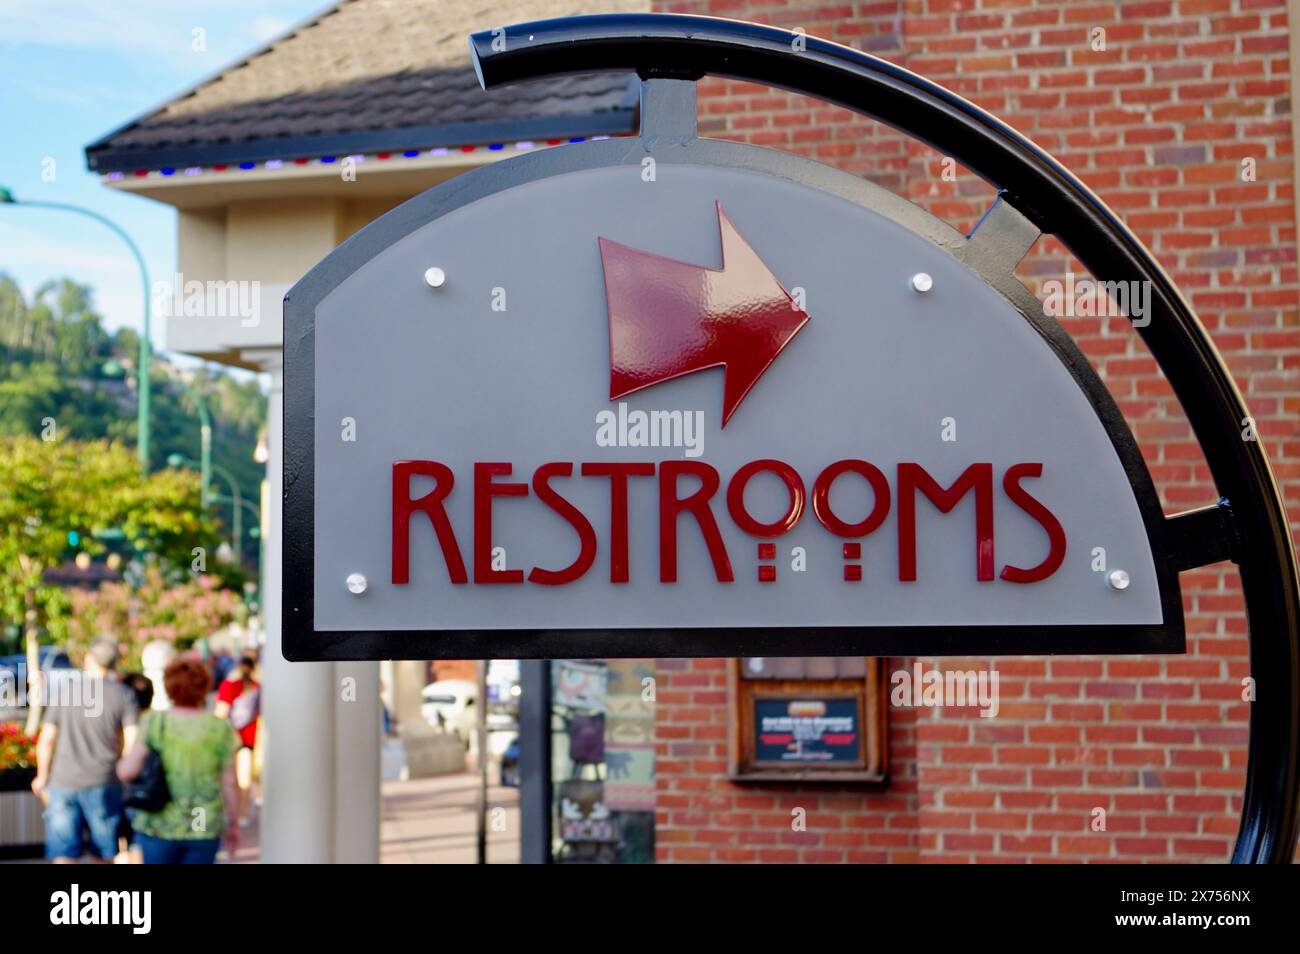 Sign with red letters on a City Sidewalk pointing to restrooms Stock Photo